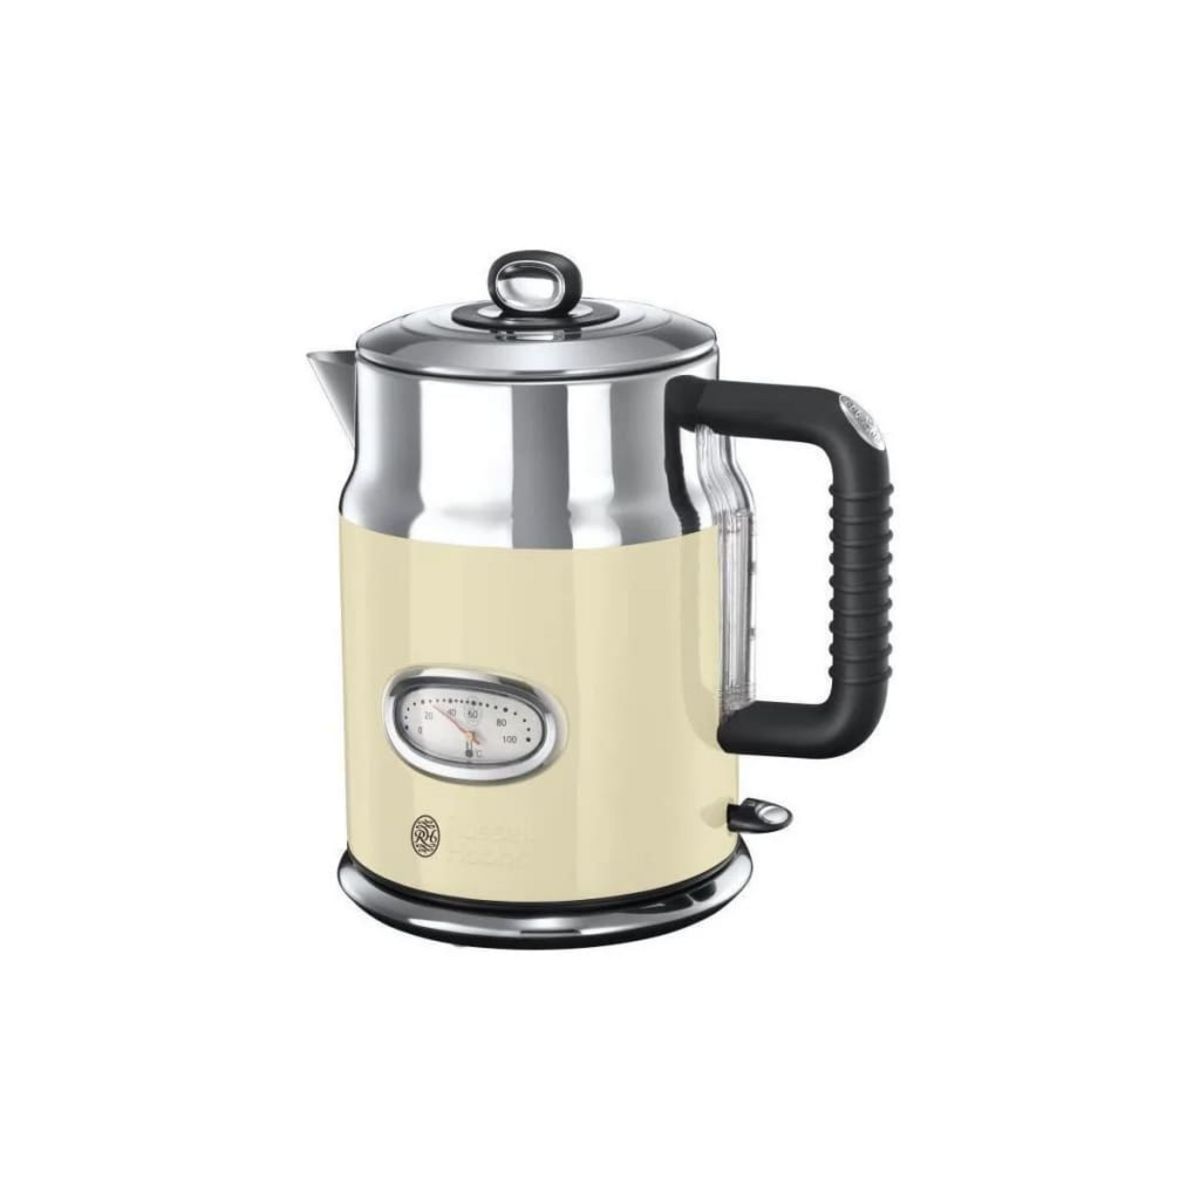 Russell Hobbs Russell Hobbs Bouilloire Retro Creme vintage 2400 W